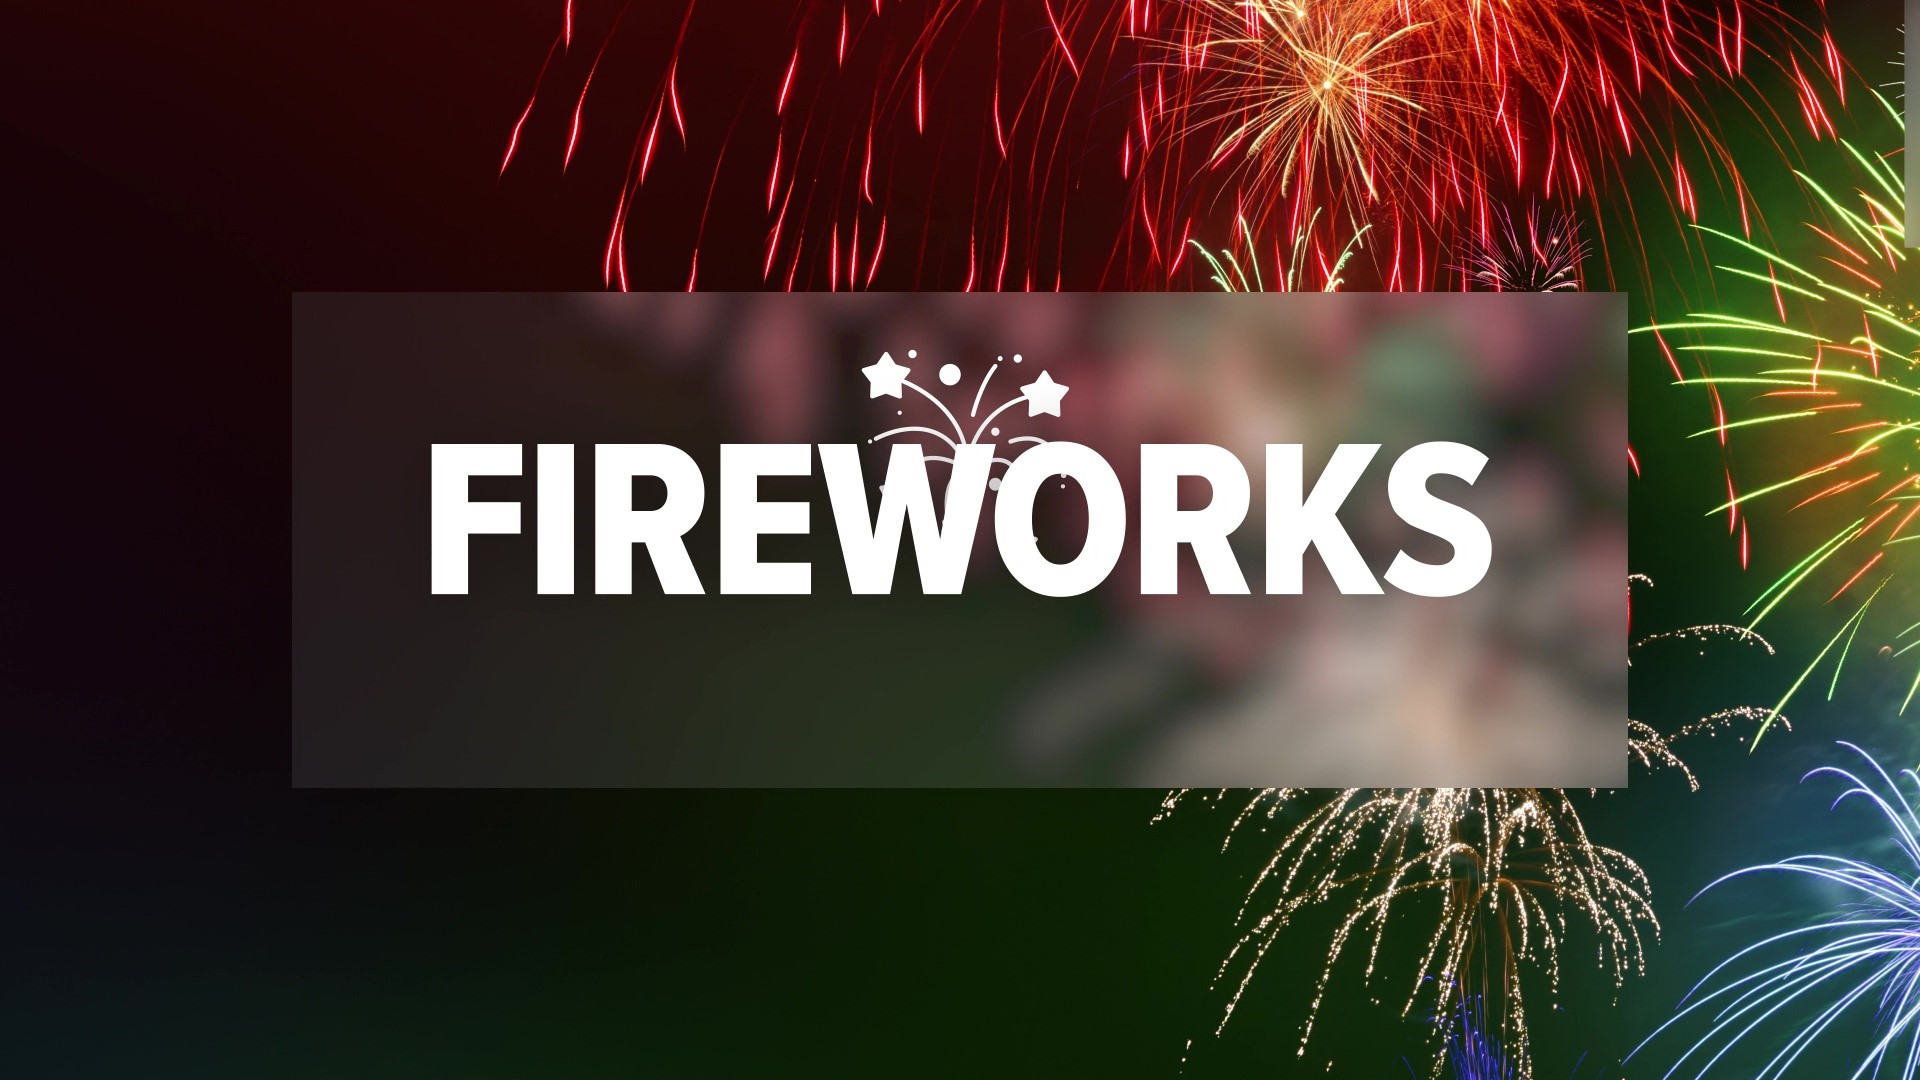 Consumer Product Safety Commission looks at firework-related injuries and safety tips ahead of July 4.